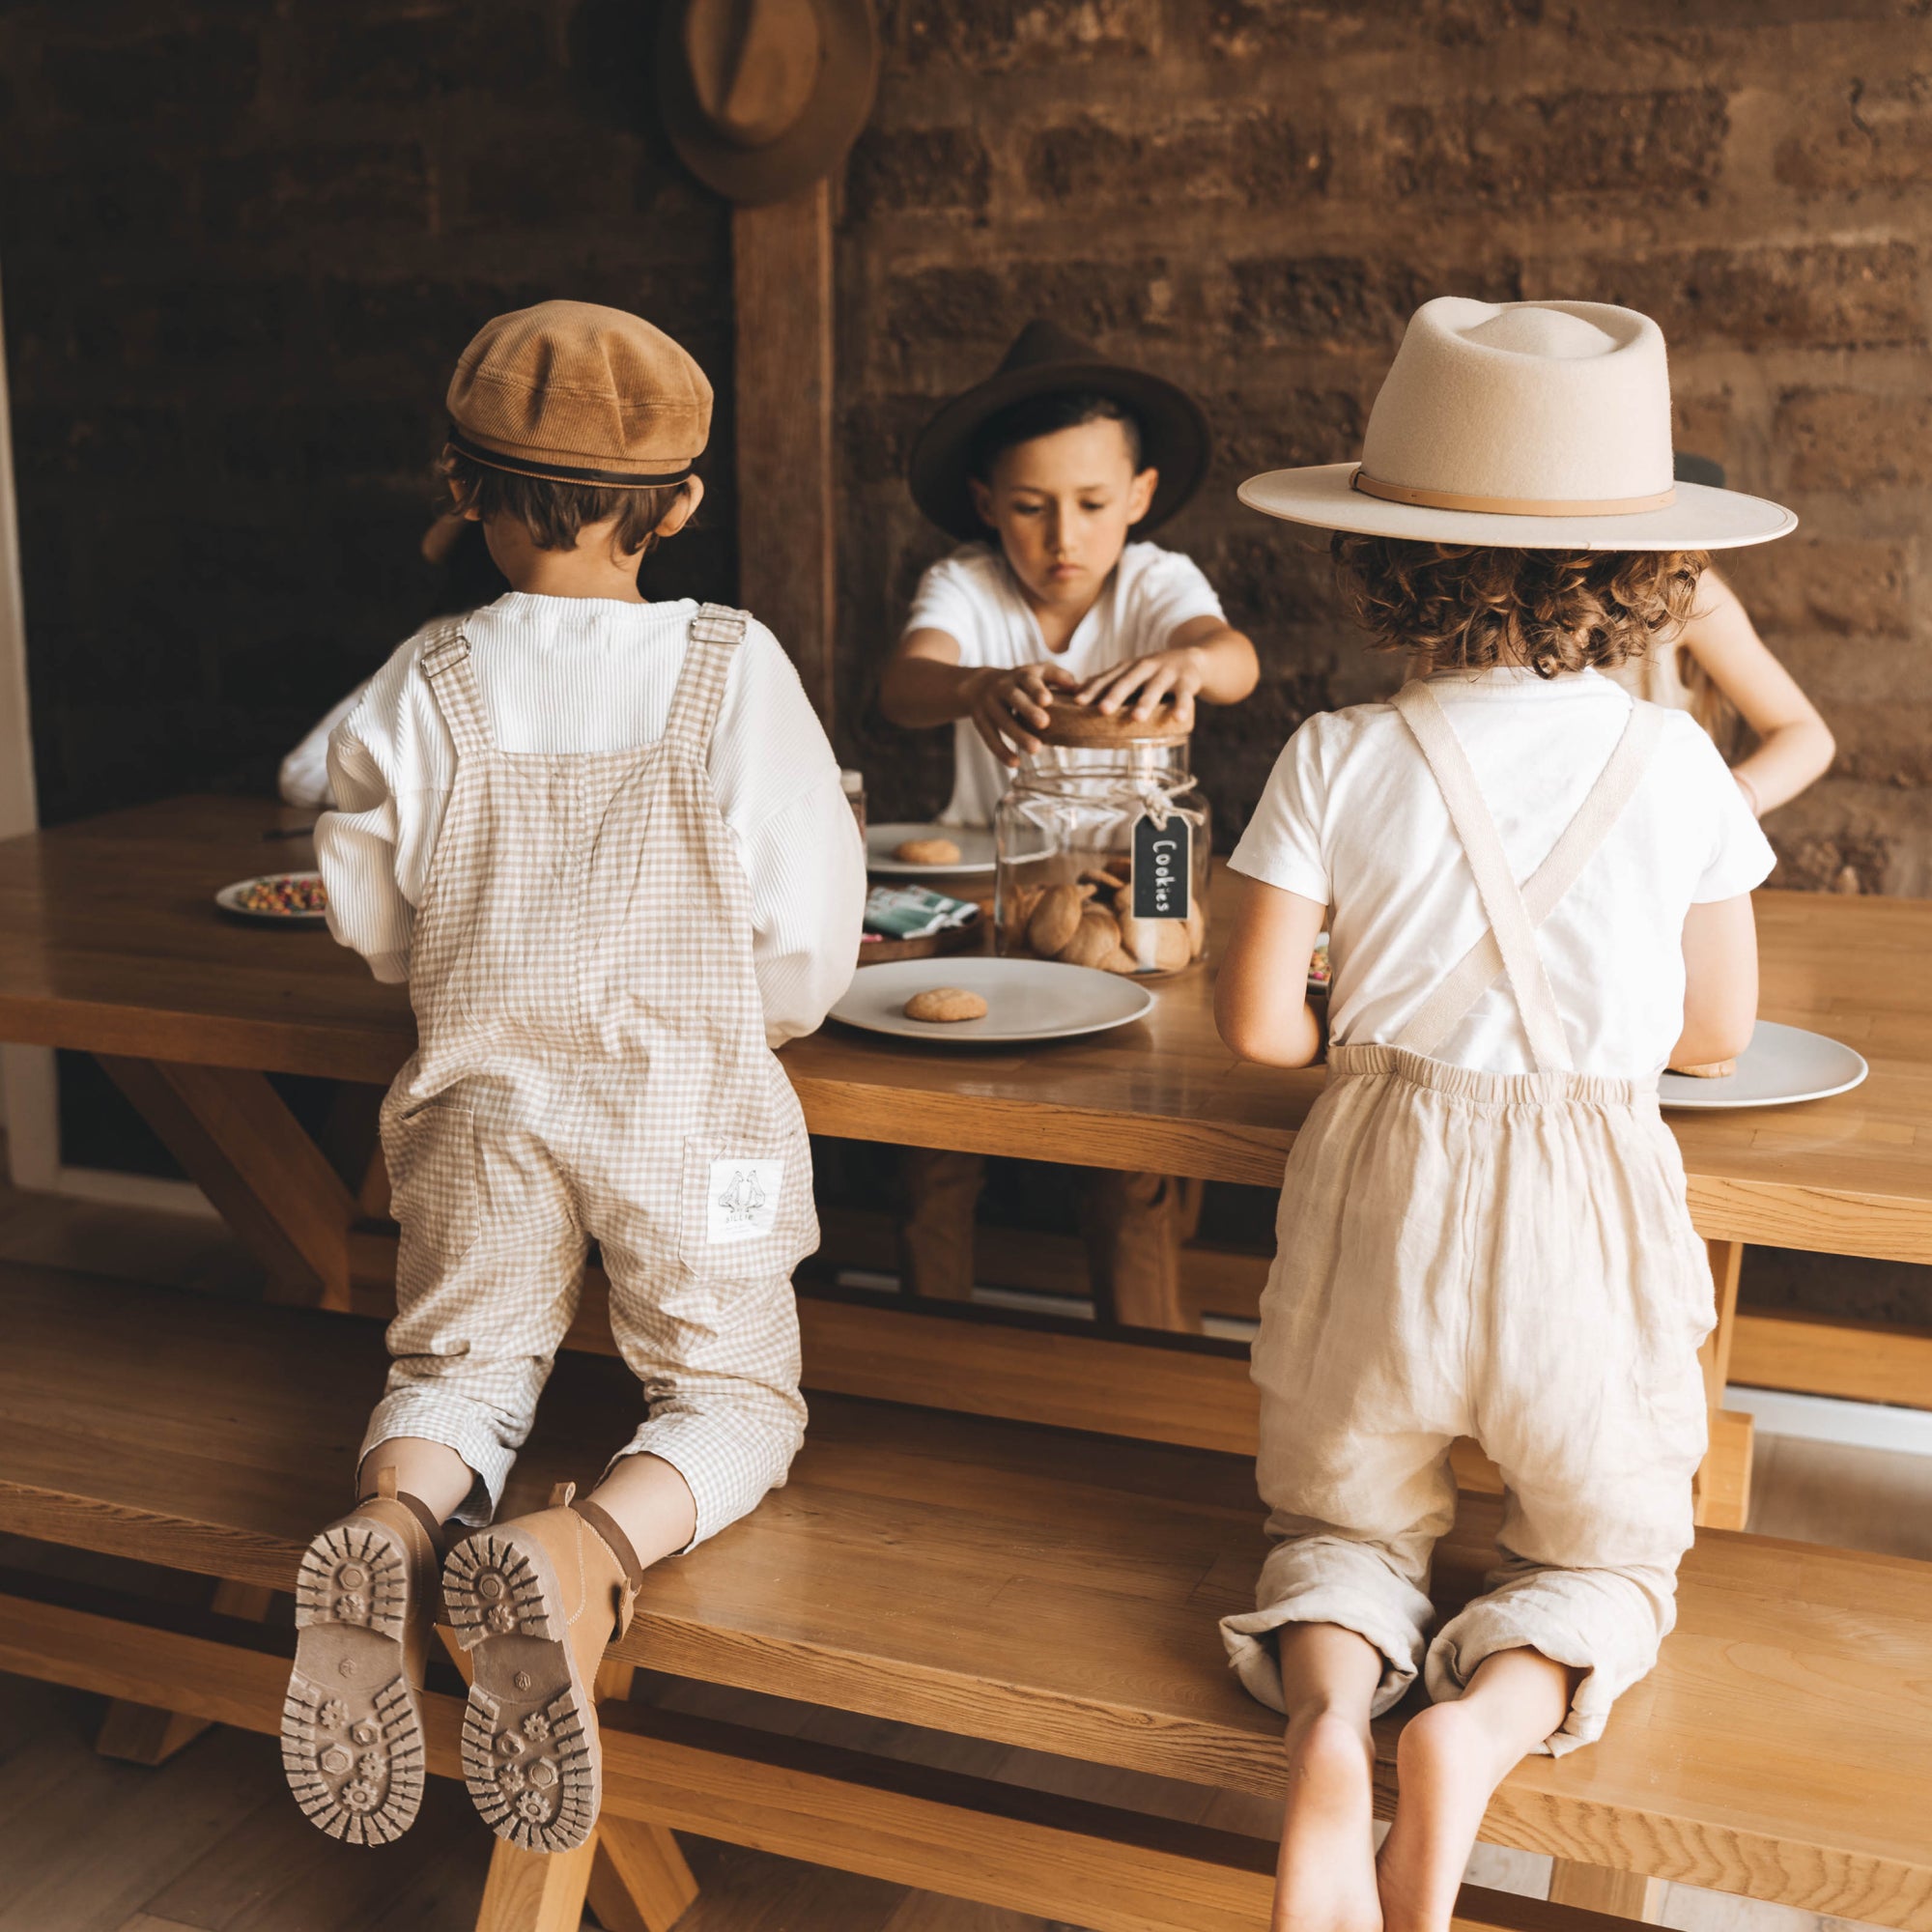 A group of young children are sitting around a wooden table icing cookies